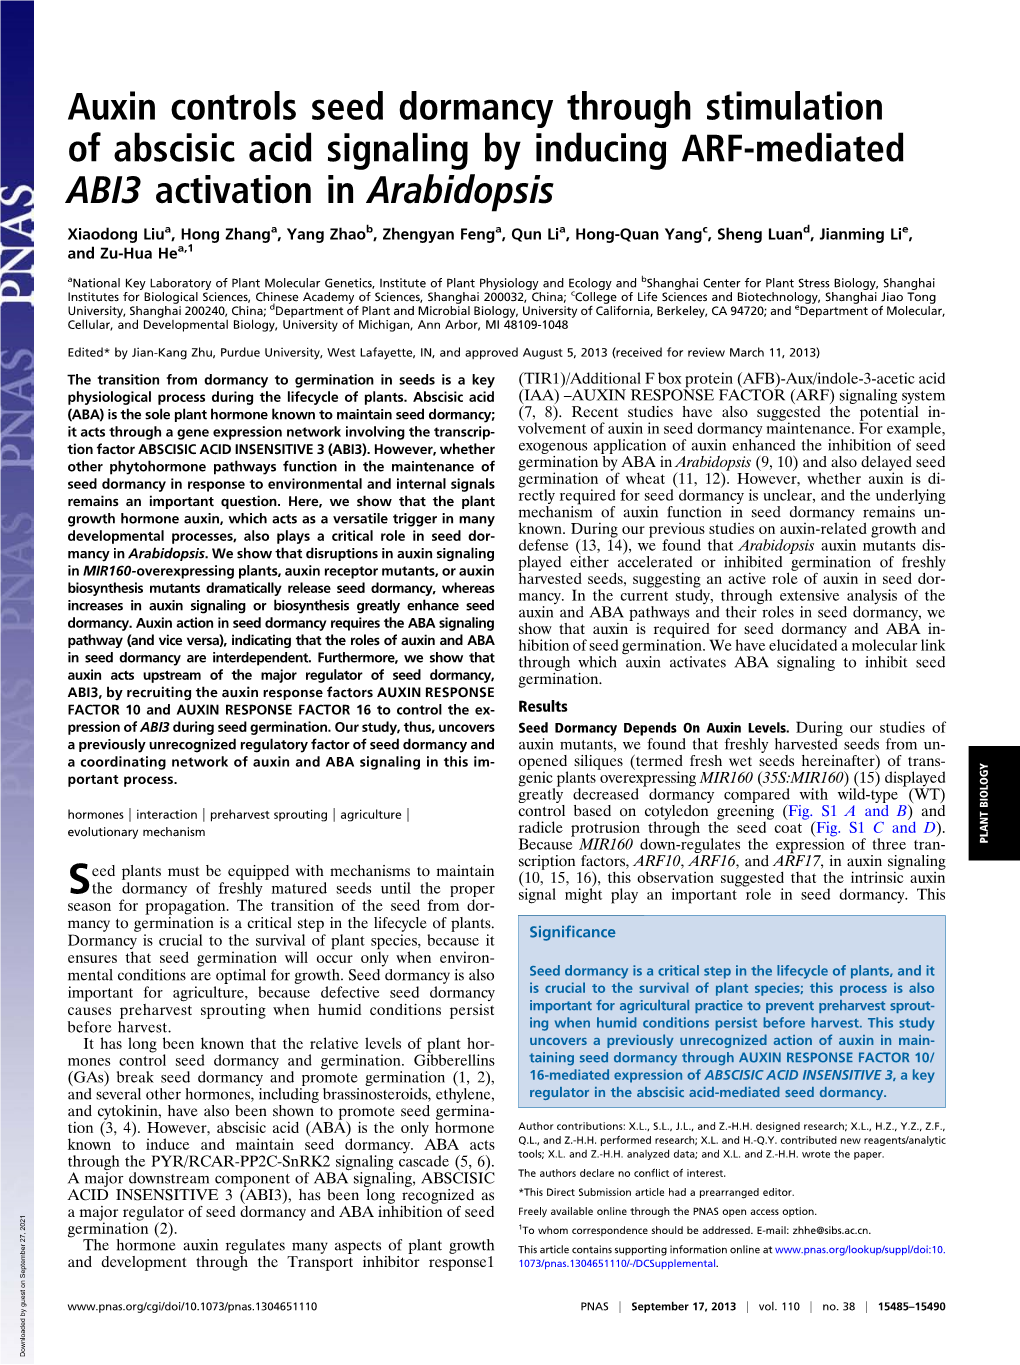 Auxin Controls Seed Dormancy Through Stimulation of Abscisic Acid Signaling by Inducing ARF-Mediated ABI3 Activation in Arabidopsis